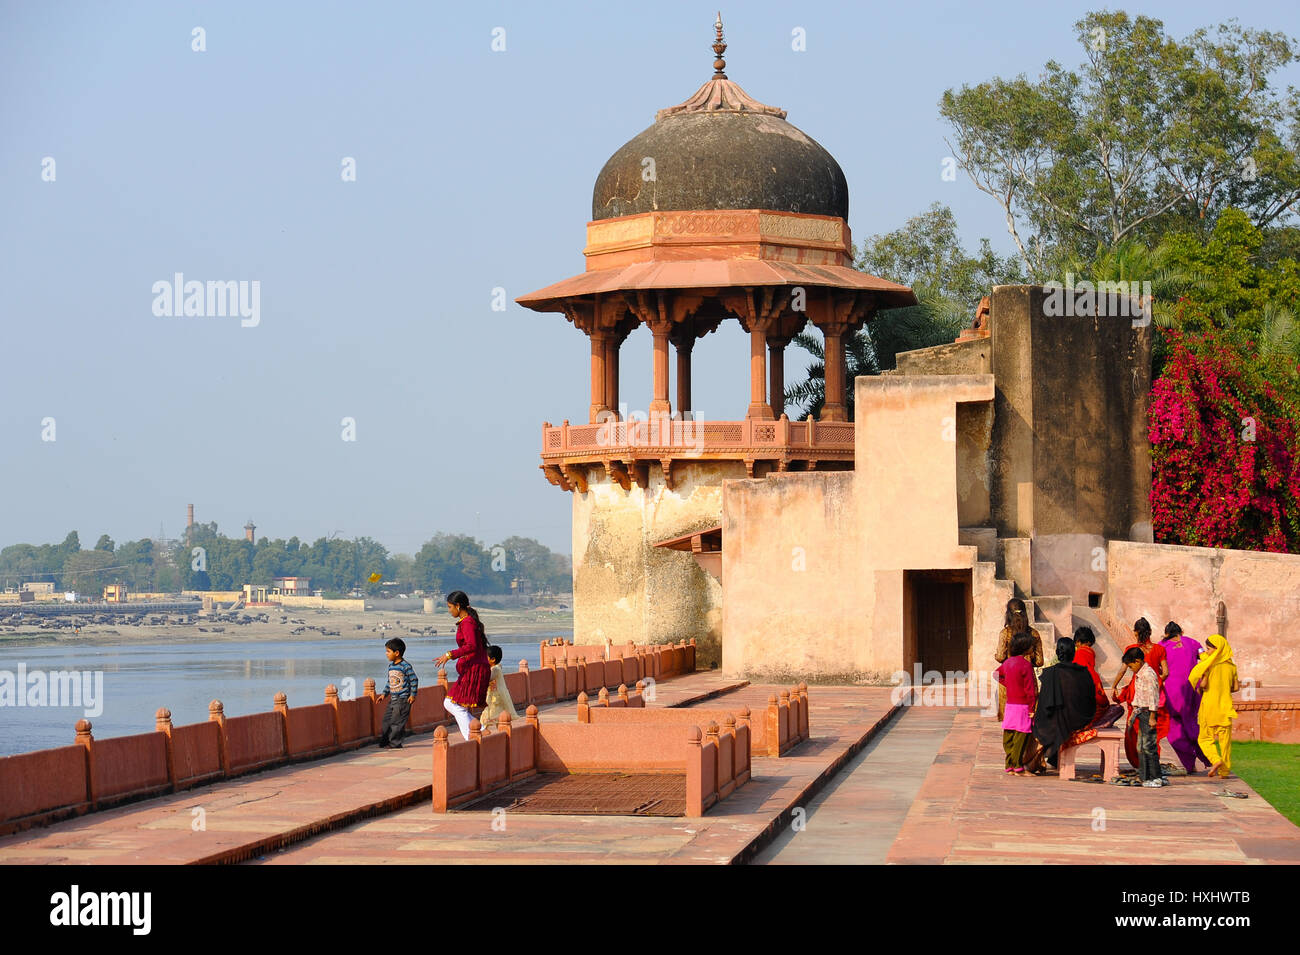 Embankment and domed outbuilding withint grounds of the Tomb of I'timād-ud-Daulah, Agra Stock Photo